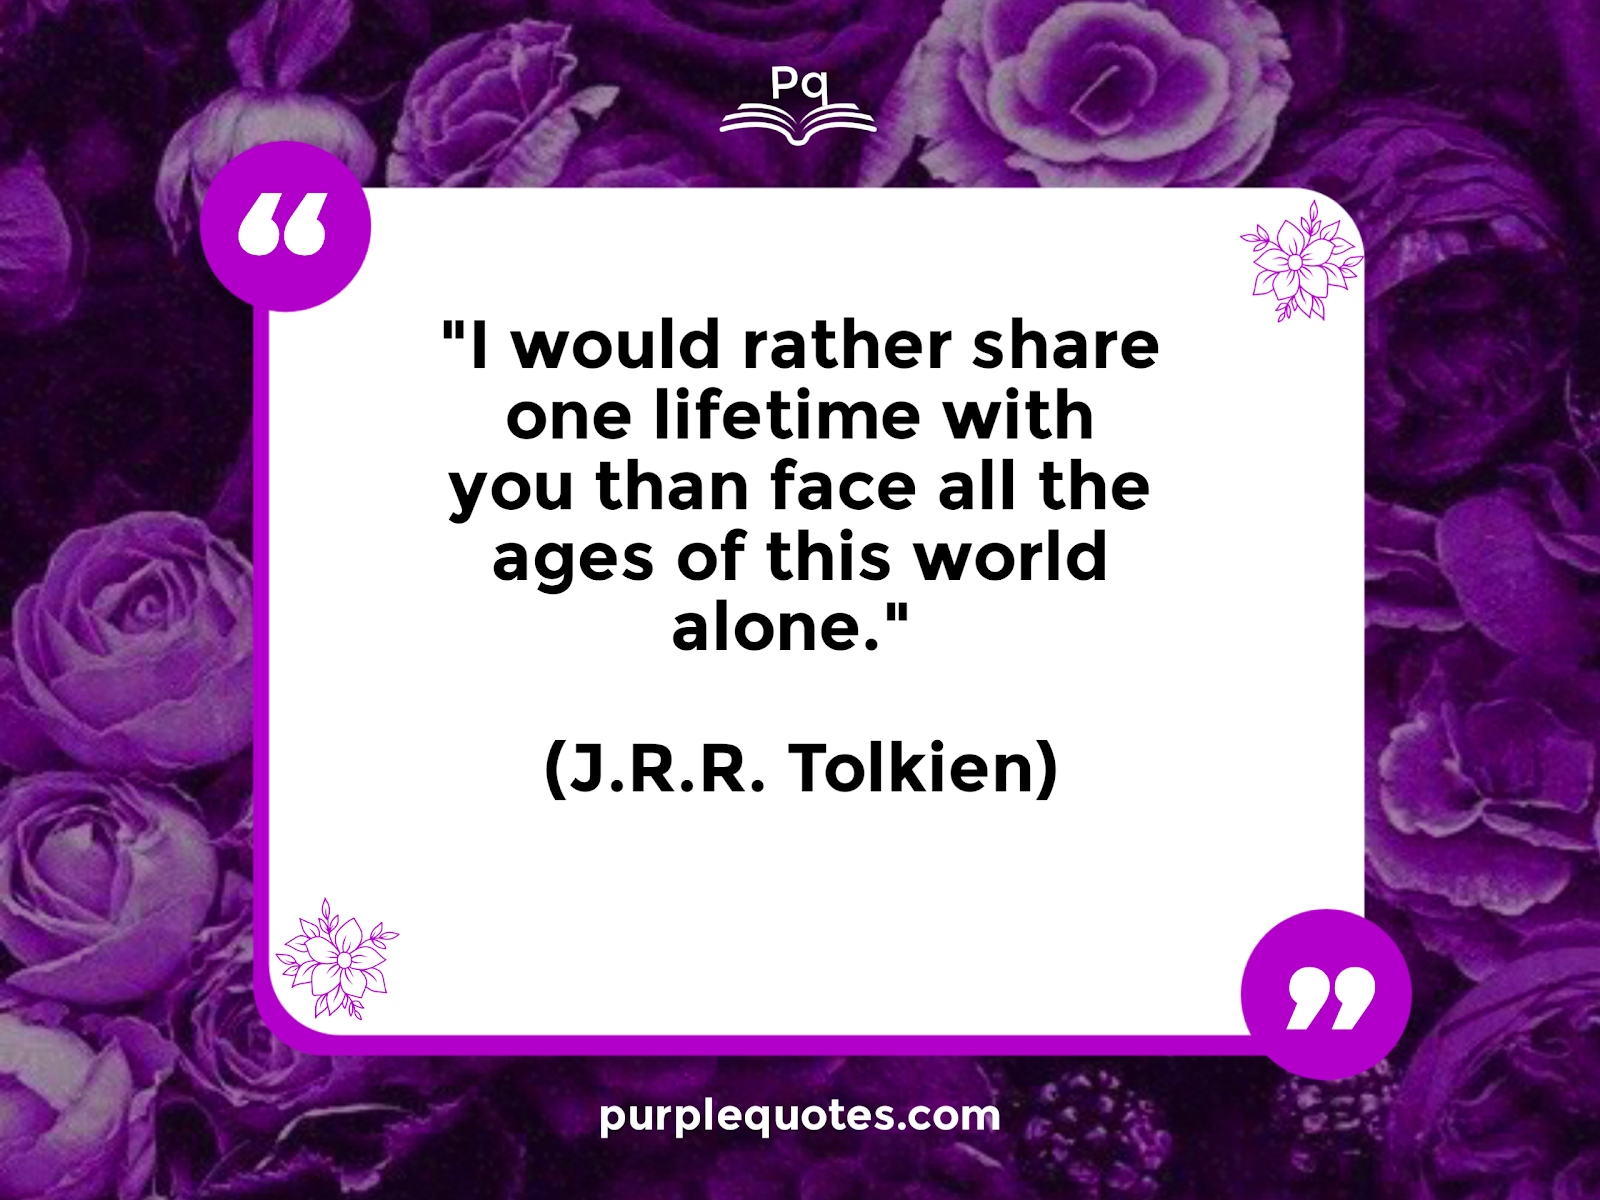  "I would rather share one lifetime with you than face all the ages of this world alone." (J.R.R. Tolkien)